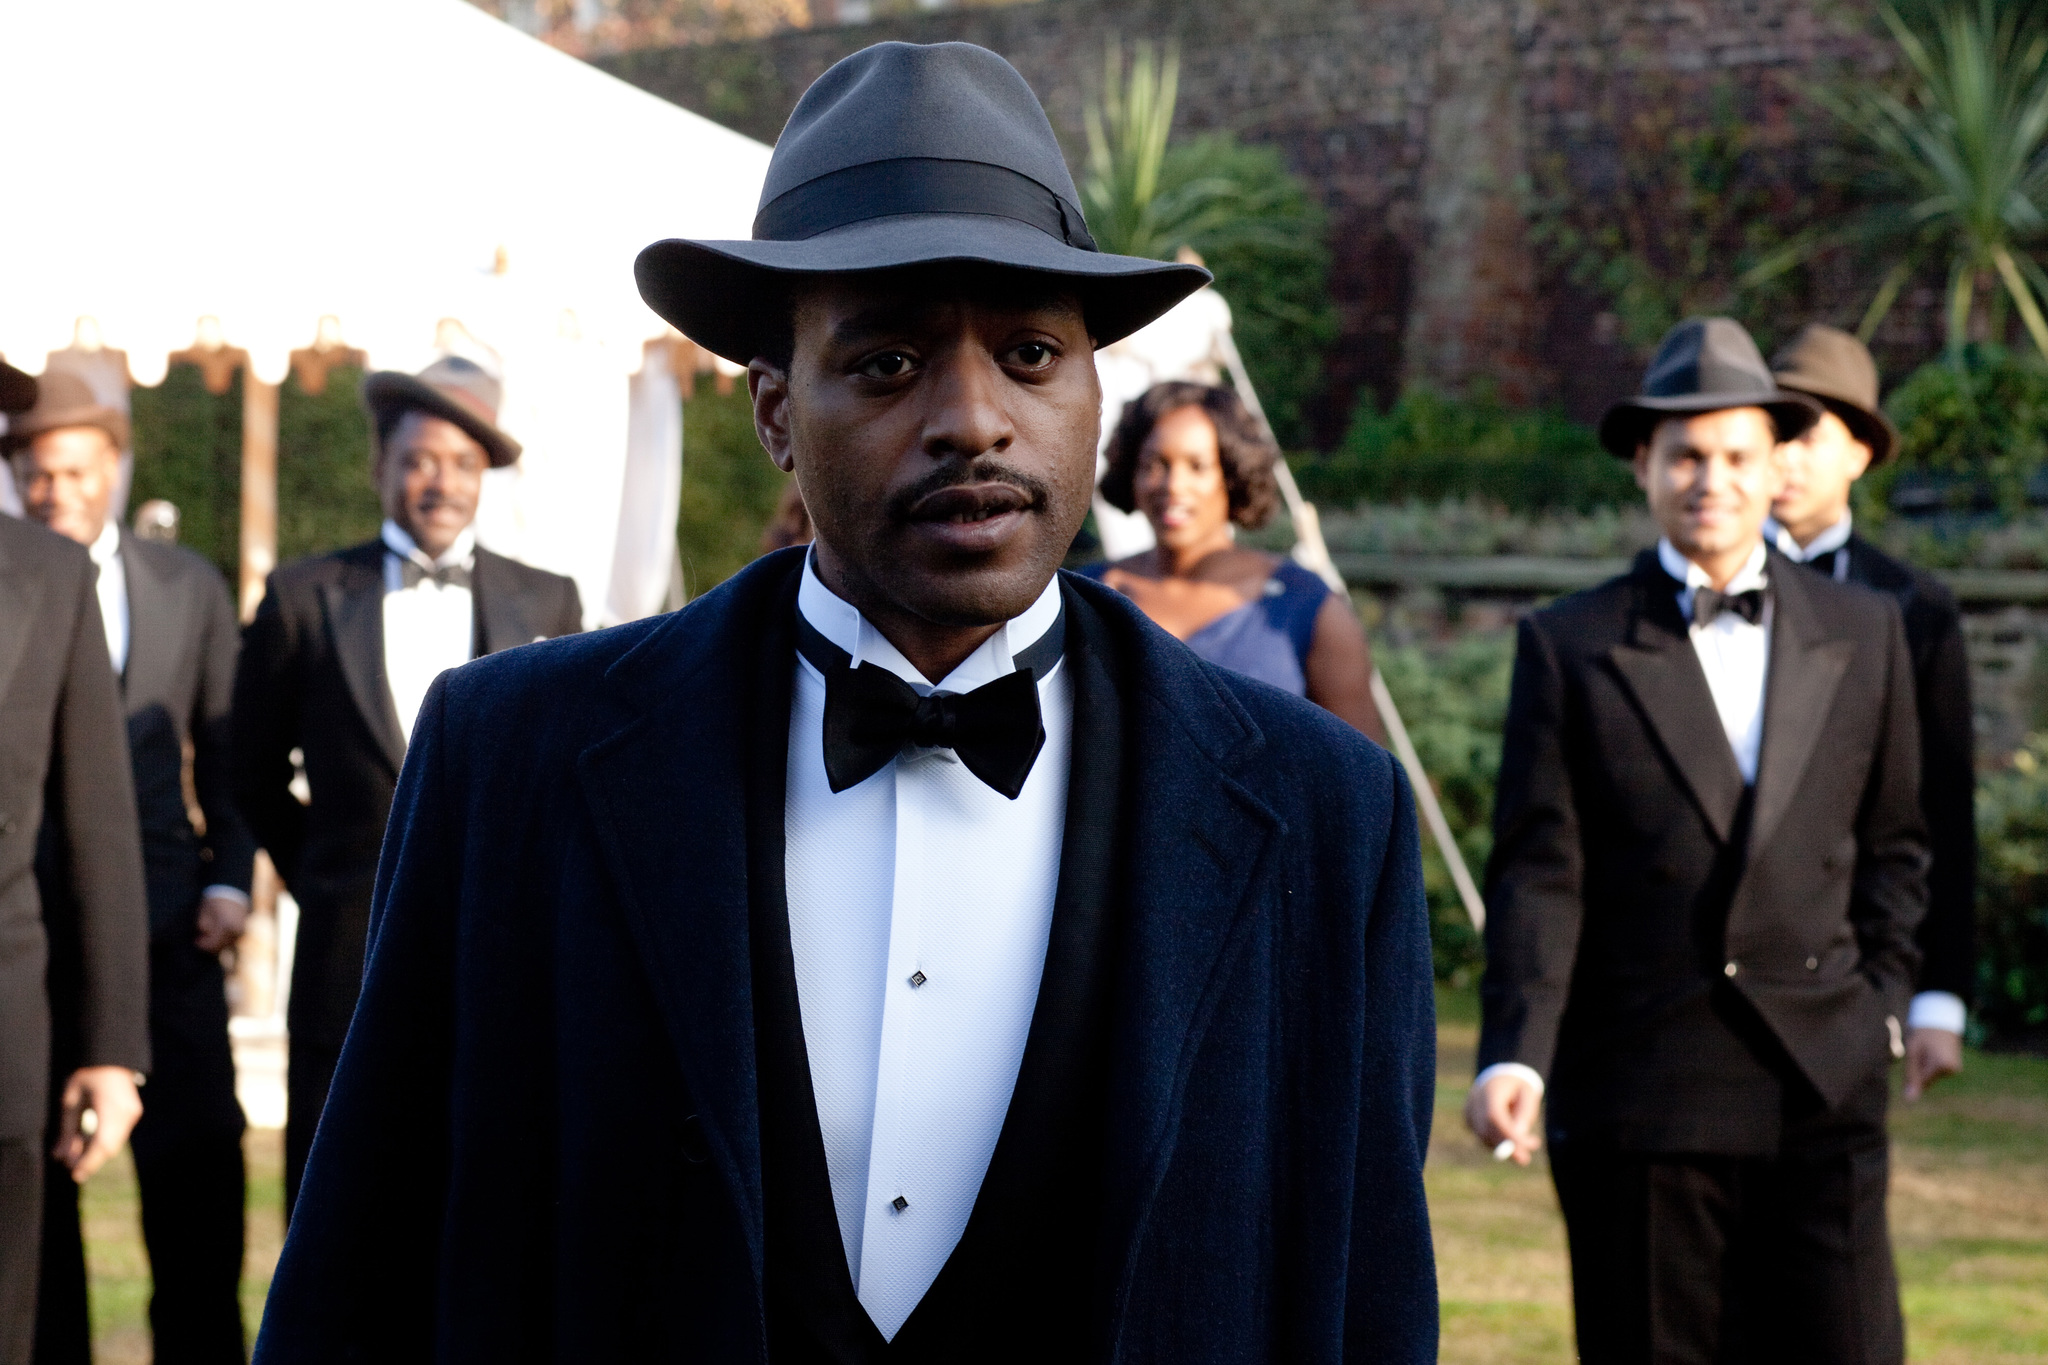 Still of Chiwetel Ejiofor, Jay Phelps and Oroh Angiama in Dancing on the Edge (2013)